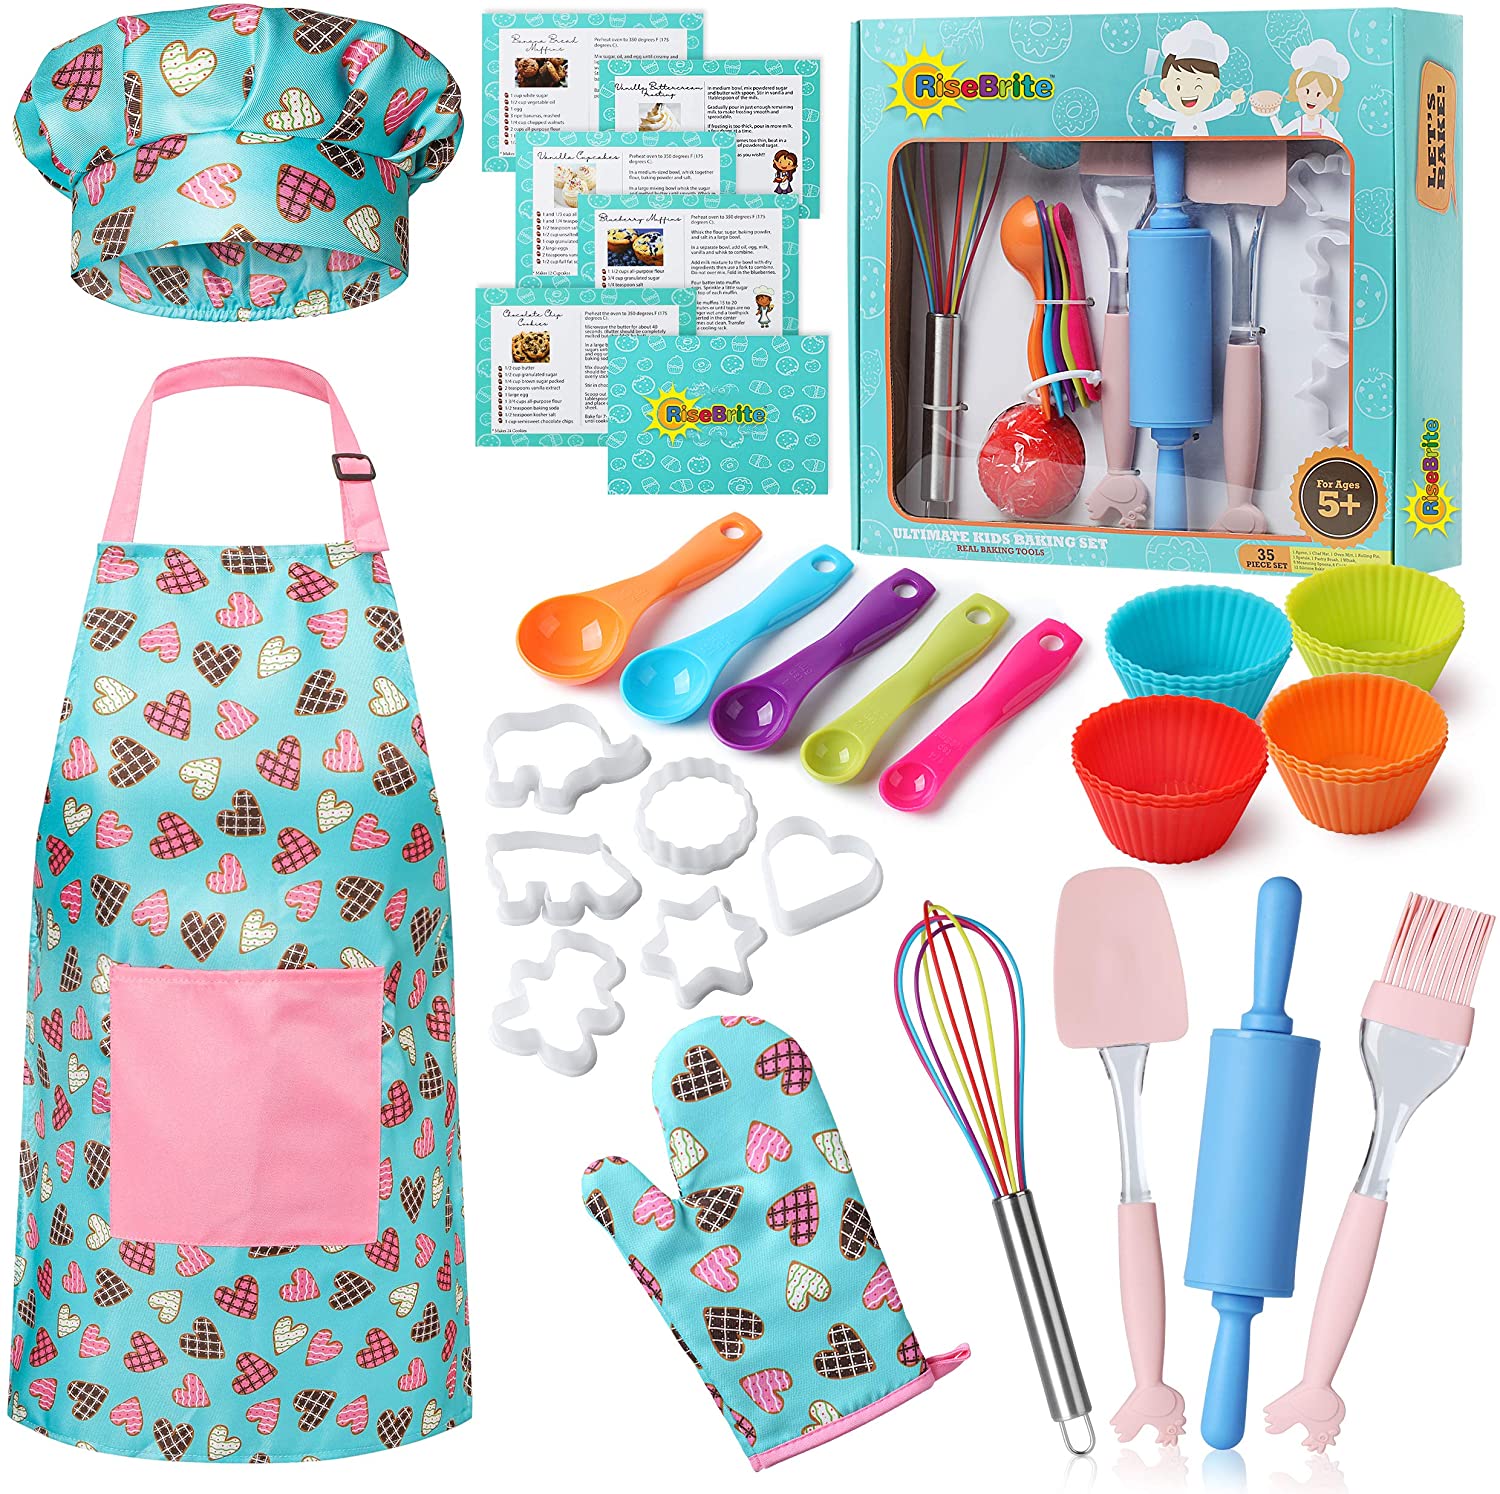 Chef Hat 34 Pcs Includes Apron for Little Girls Gemeer Complete Kids Cooking and Baking Set Oven Mitt & Utensil to Dress up Chef Career Role Play for 3-7 Years Girls 